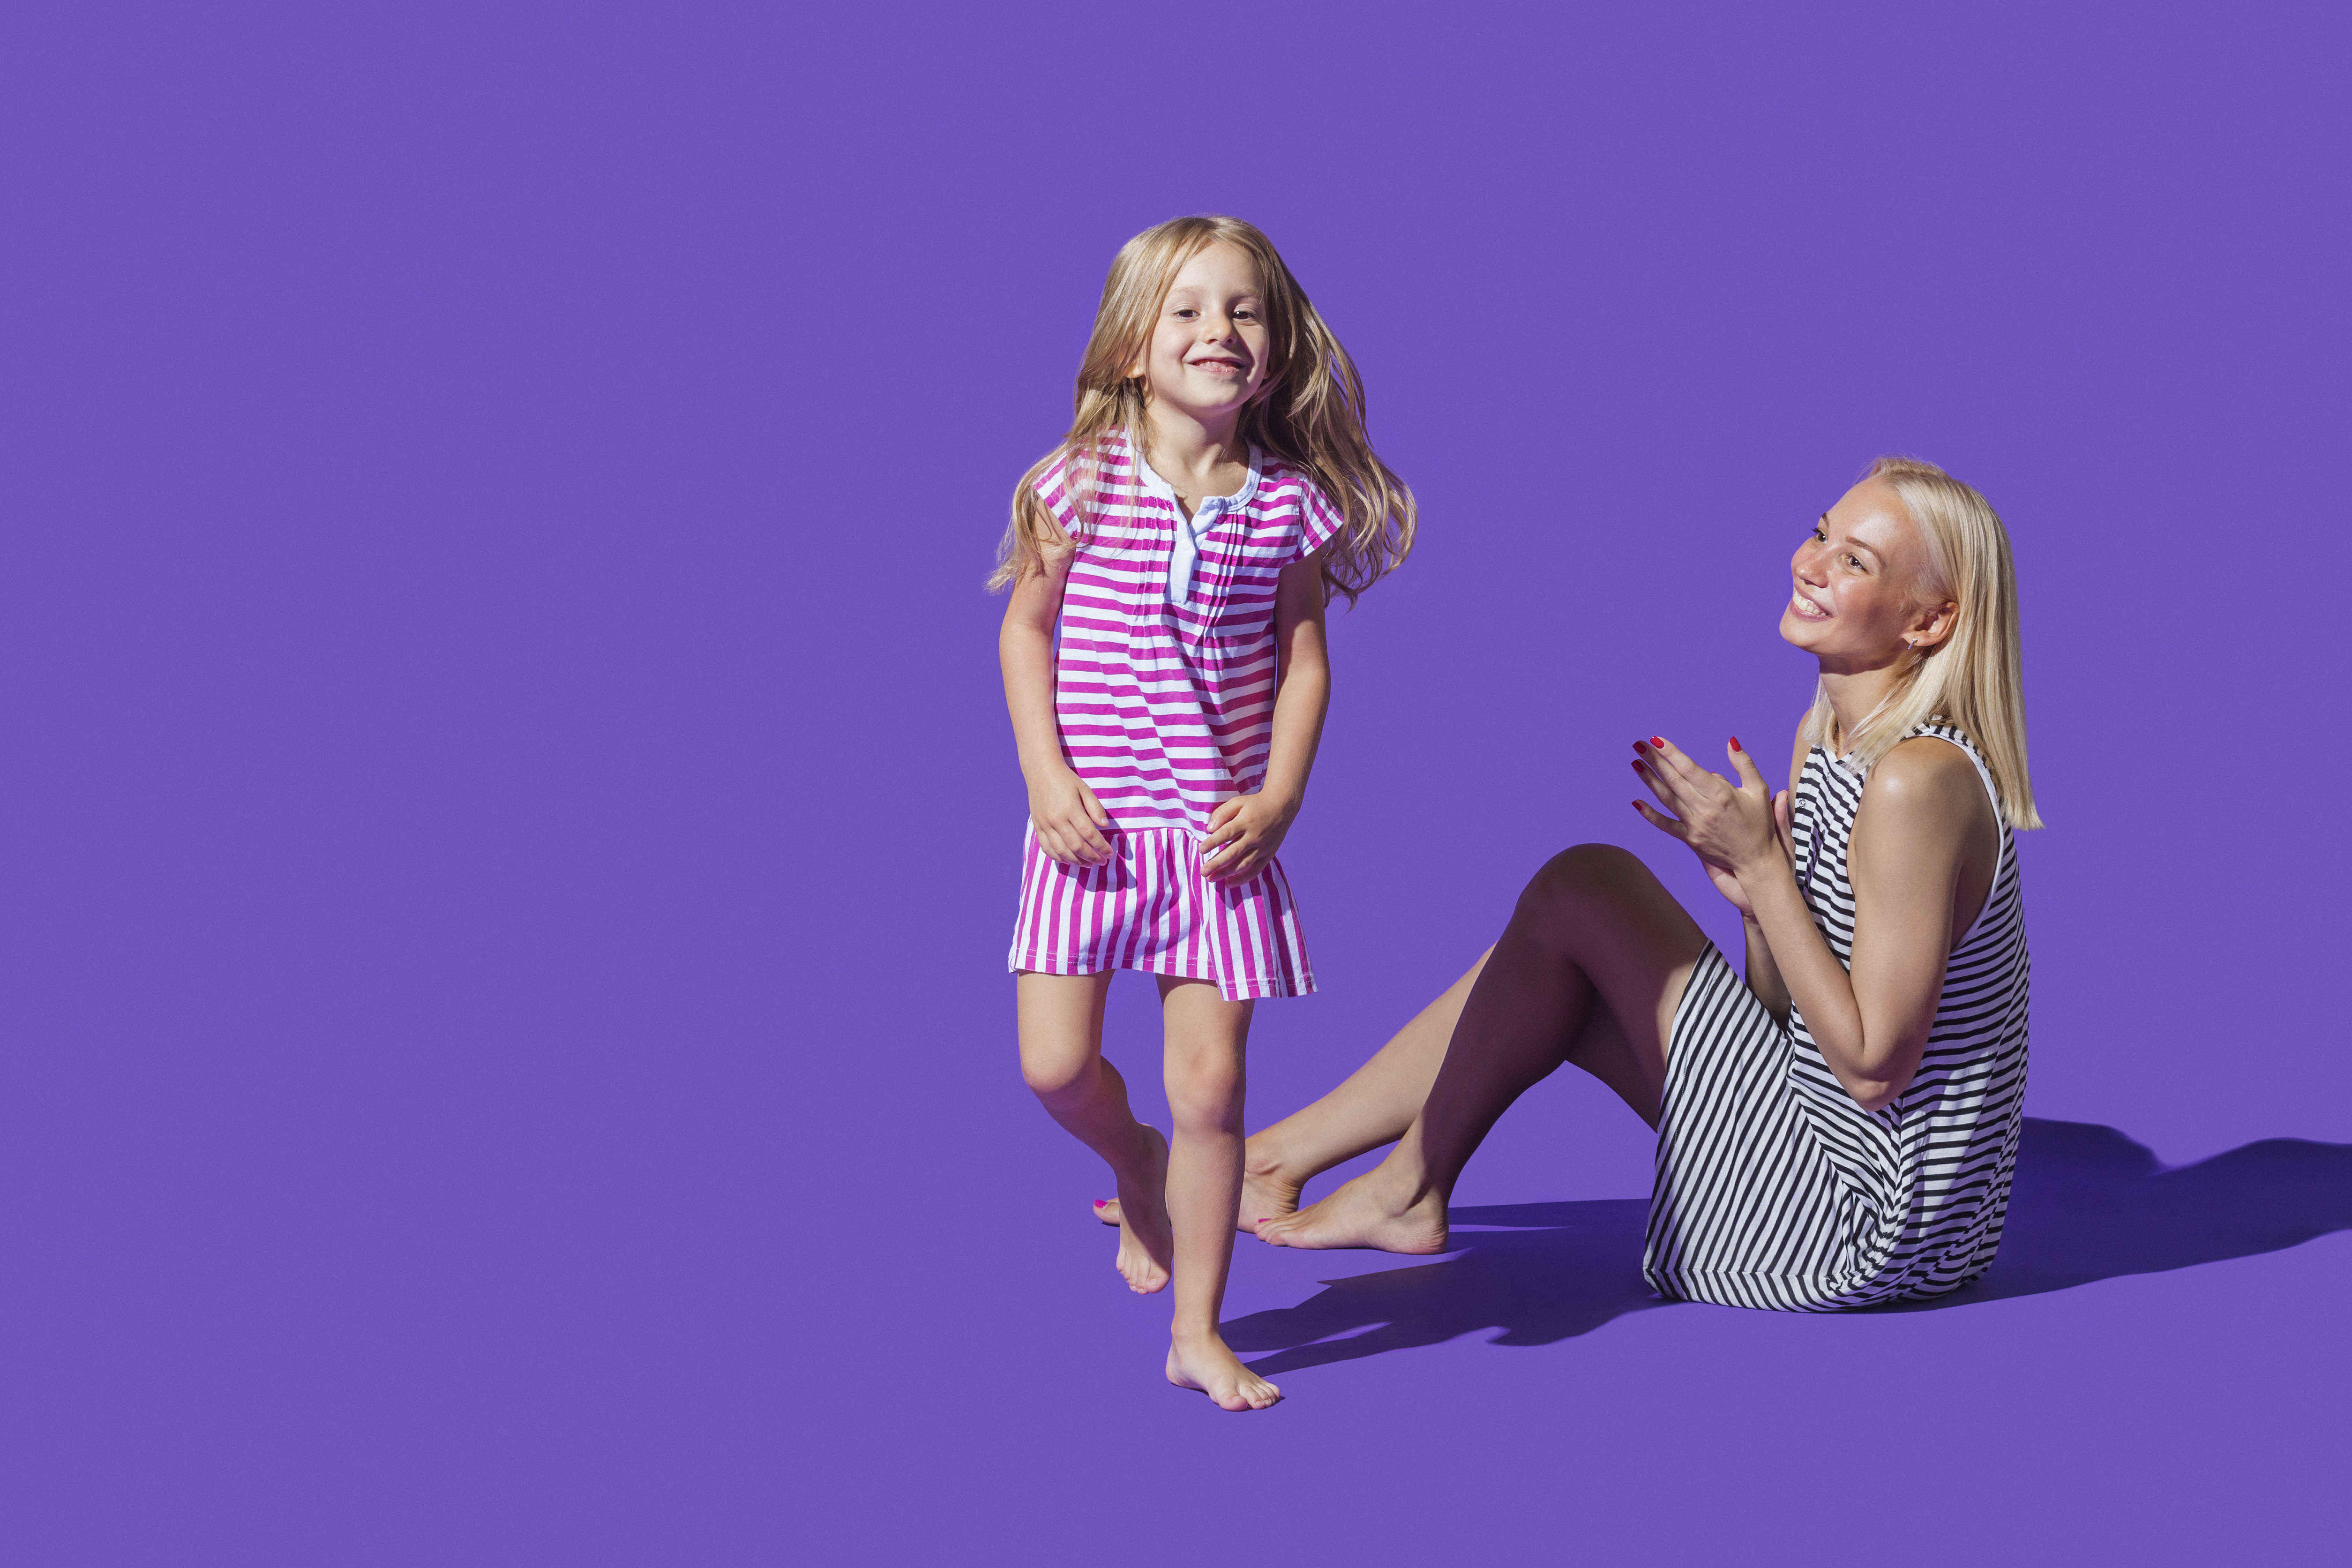 Portrait playful mother and daughter in striped dresses against purple background | Source: Getty Images